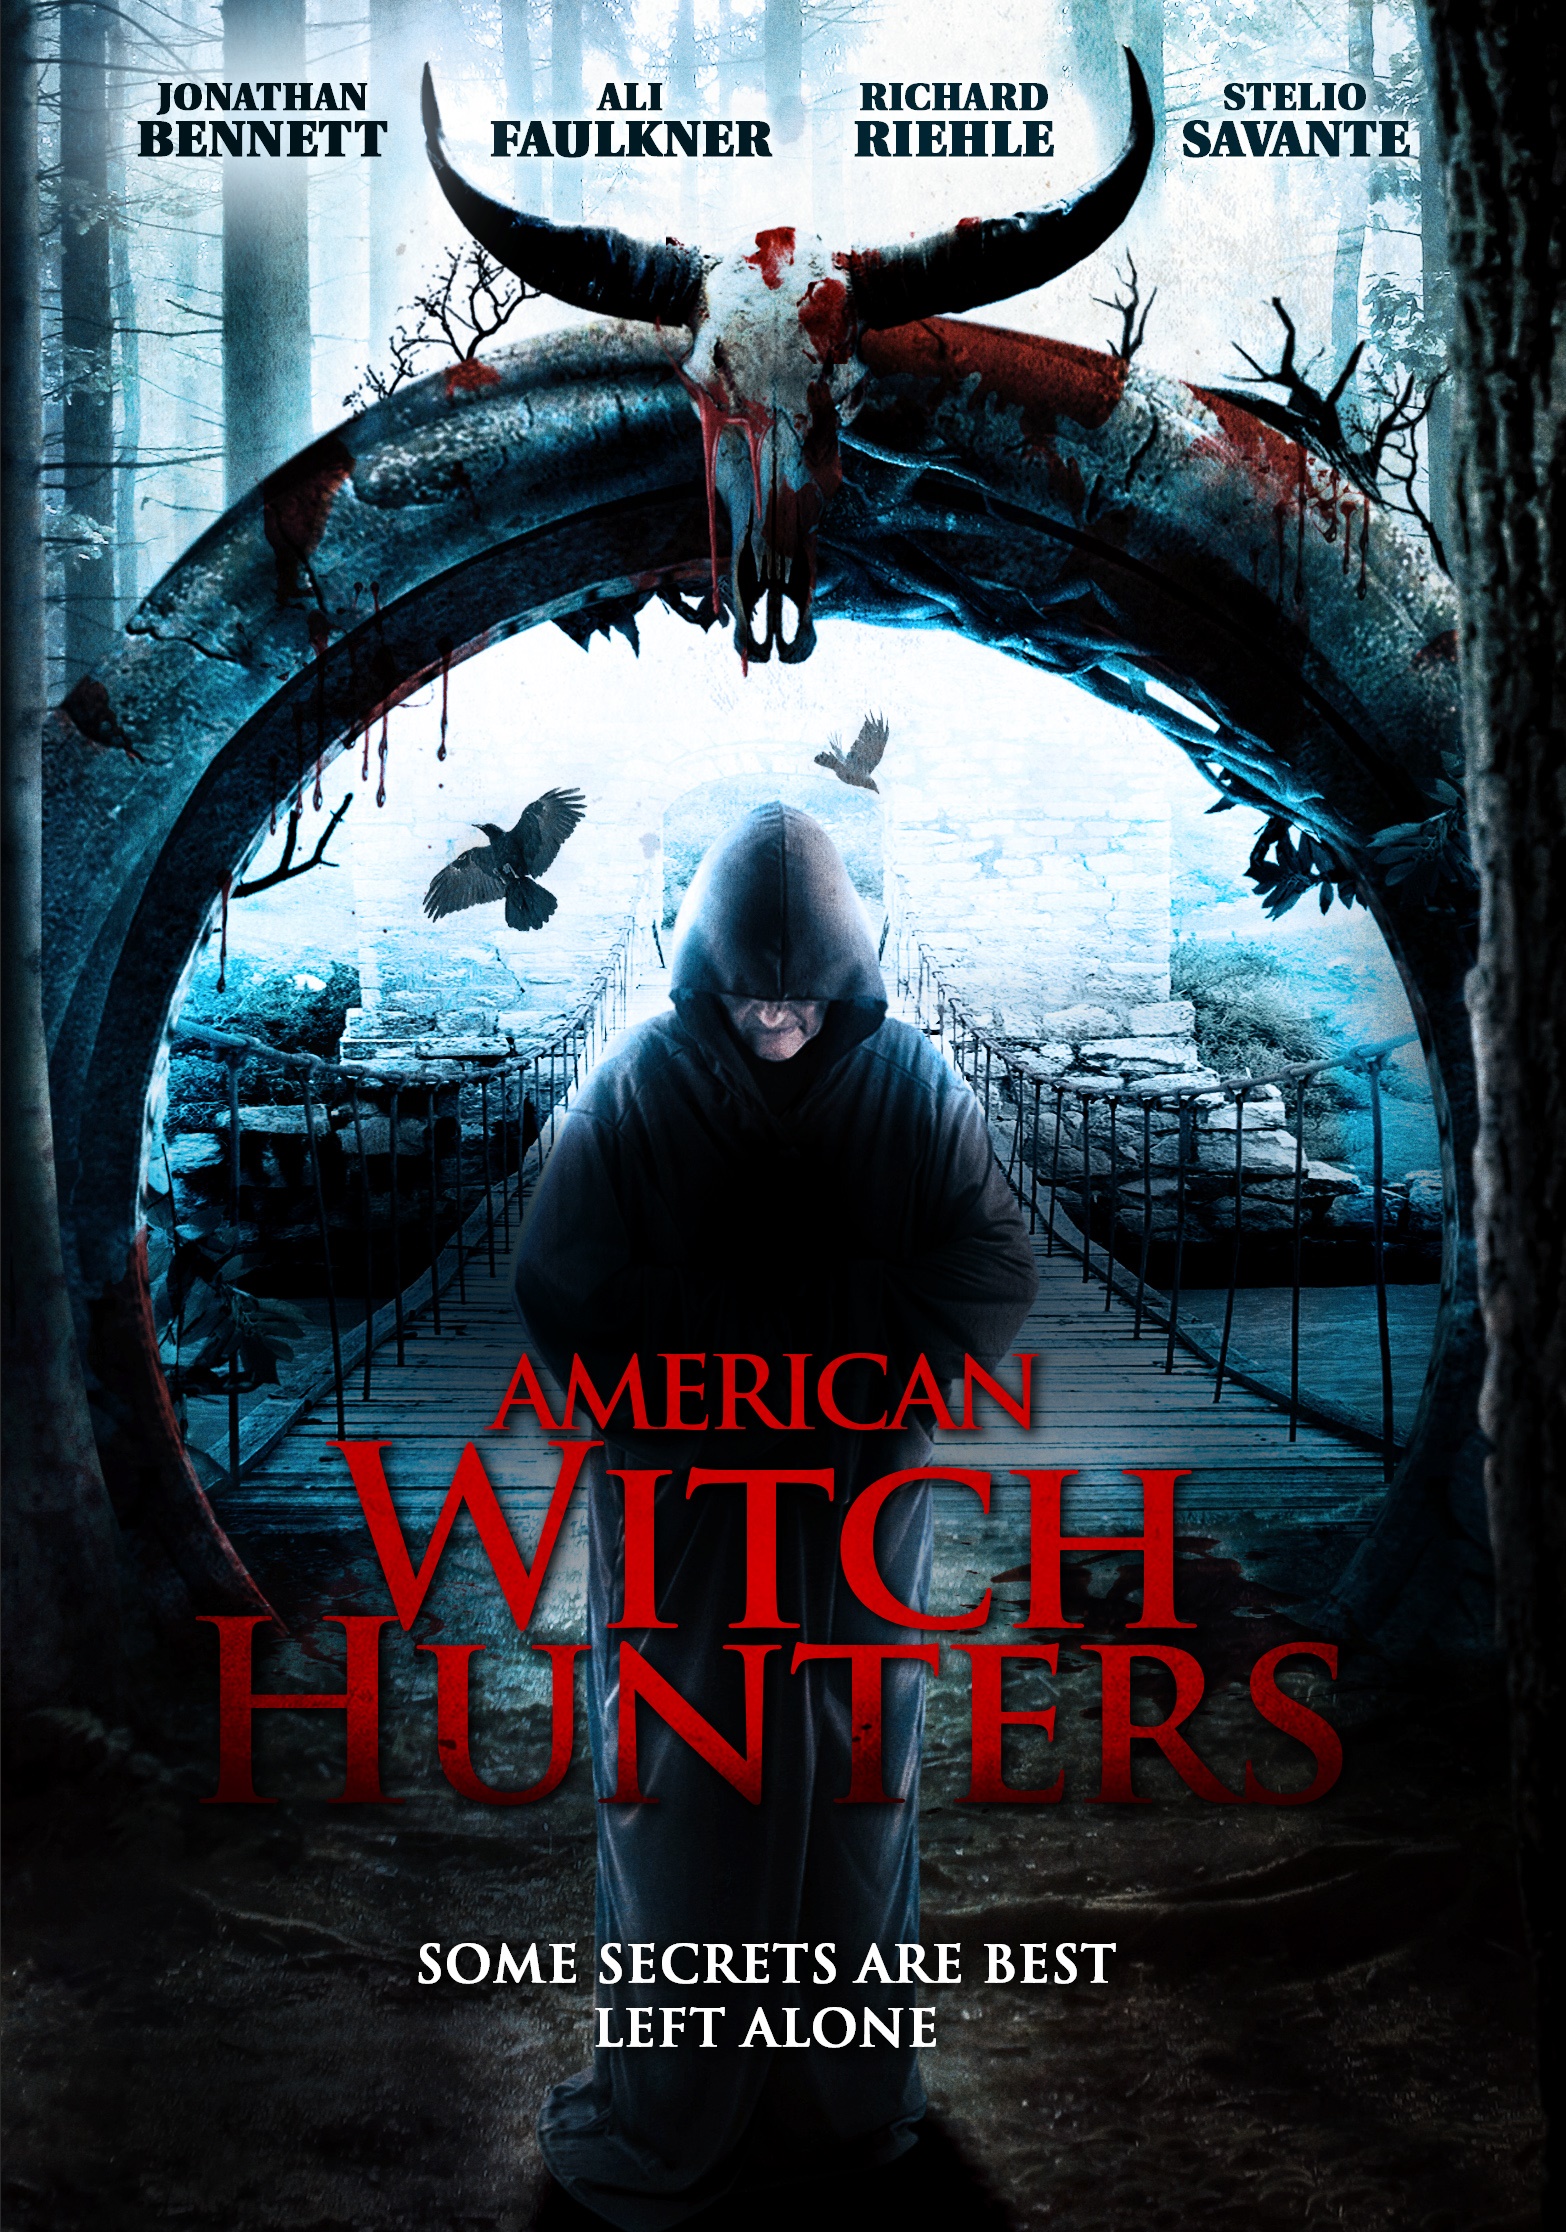 American Witch Hunters